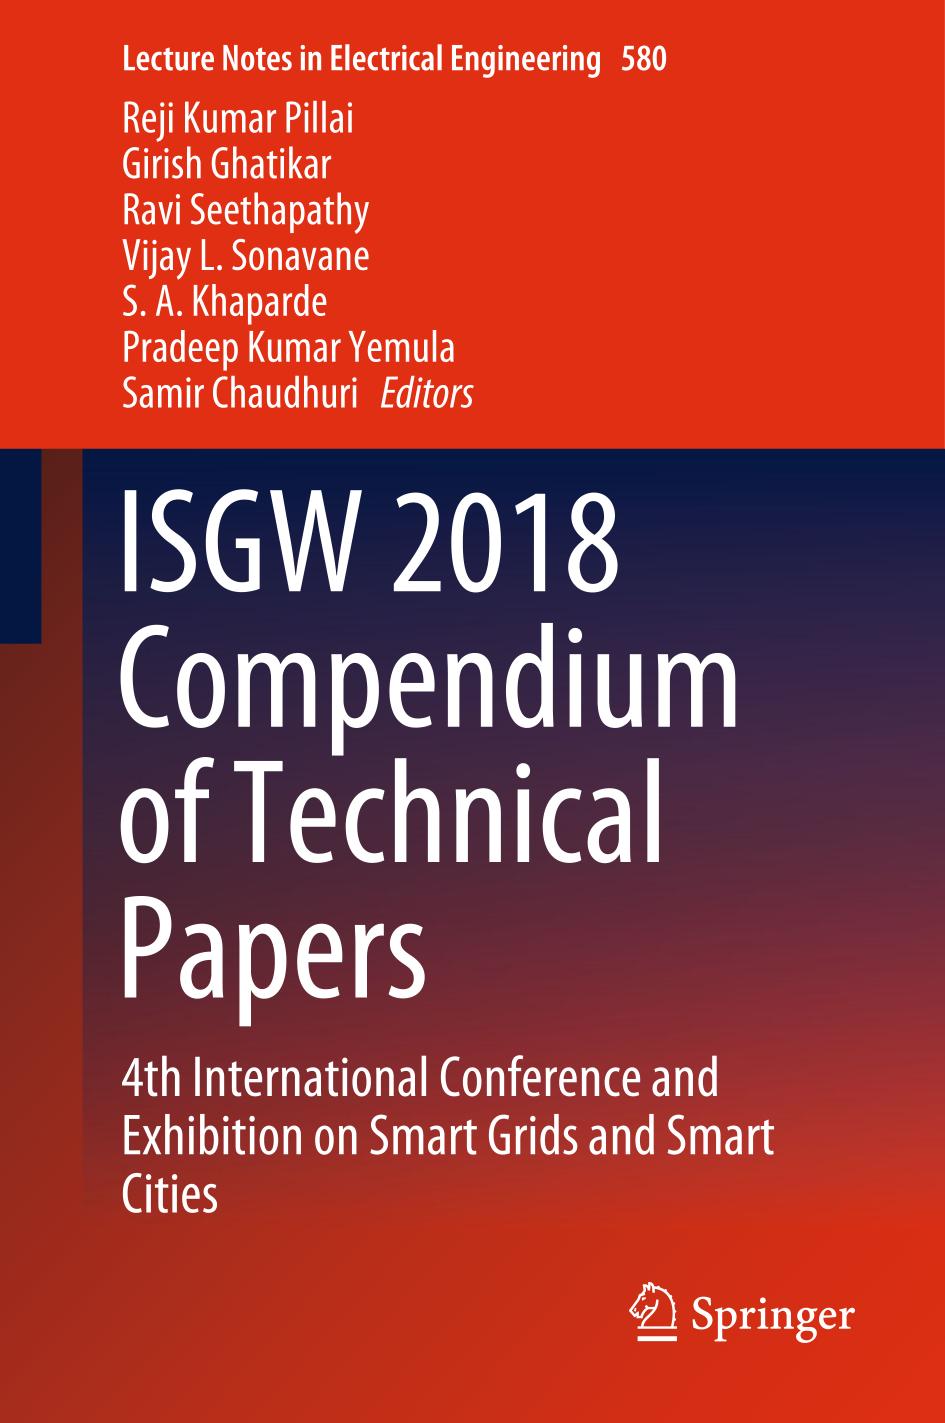 ISGW 2018 Compendium of Technical Papers 4th International Conference and Exhibition on Smart Grids and Smart Cities